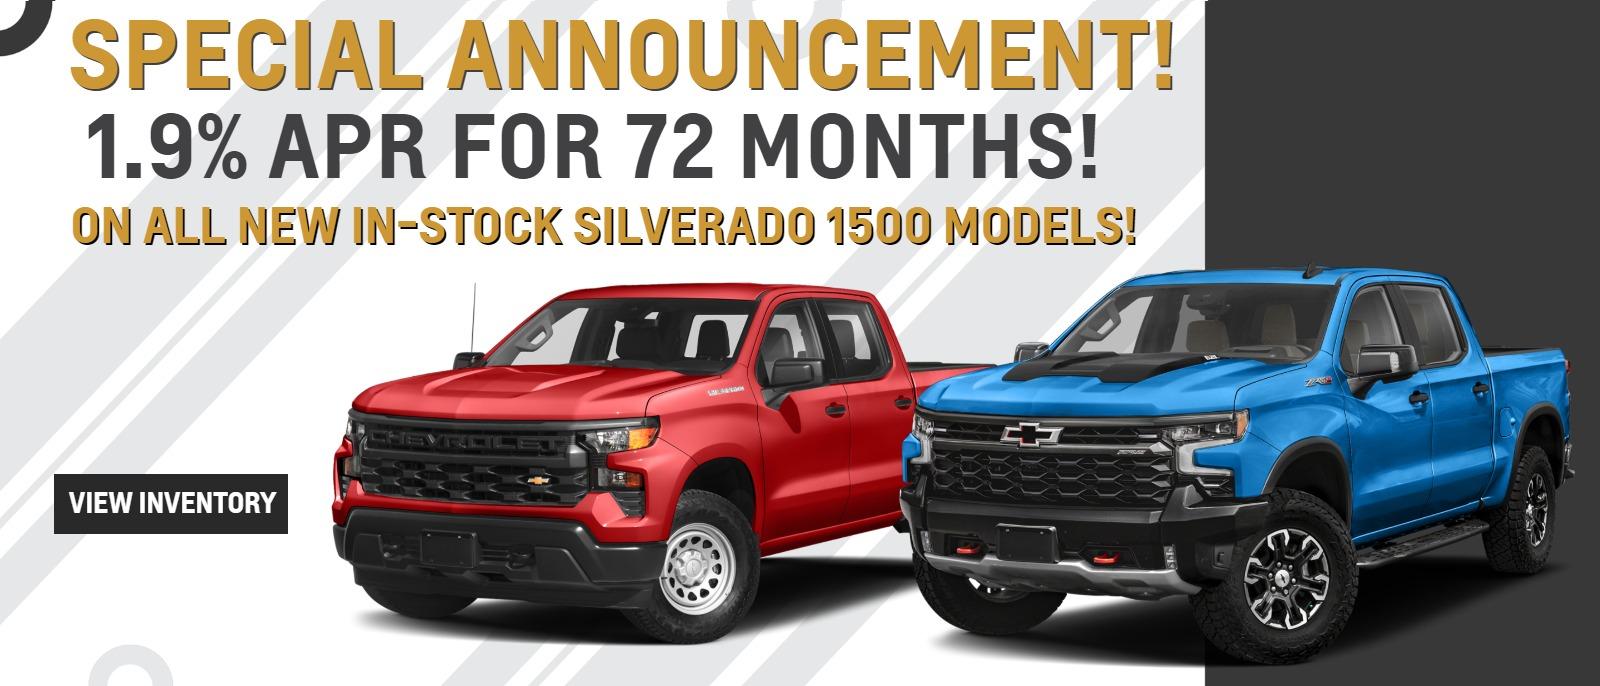 All New Silverado 1500 Models, 1.9 % A.P.R FOR 72 MONTHS